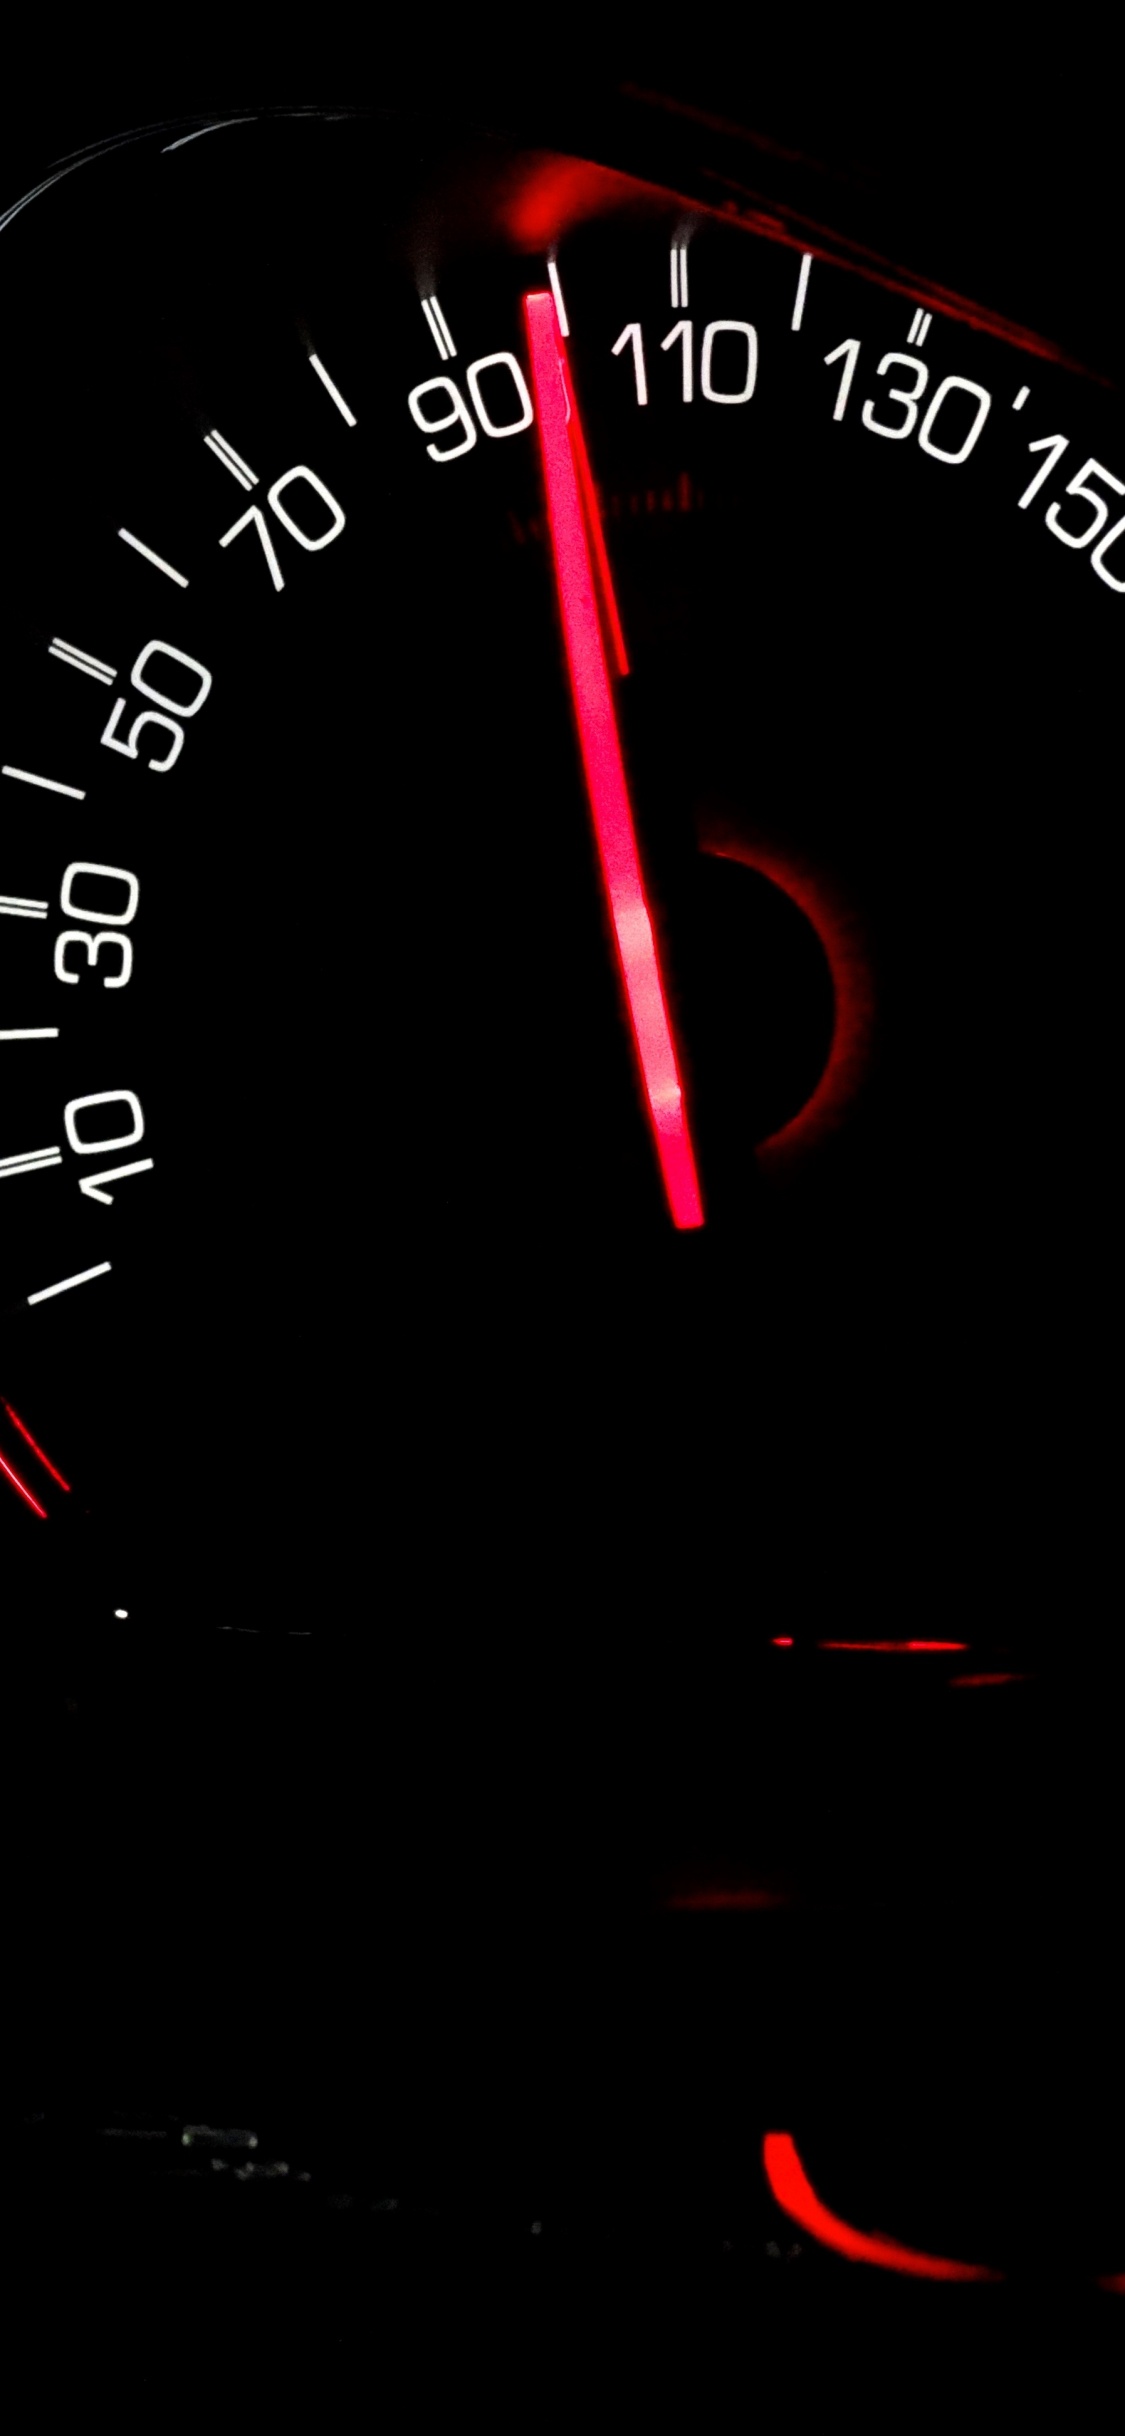 Black and Red Speedometer at 0. Wallpaper in 1125x2436 Resolution